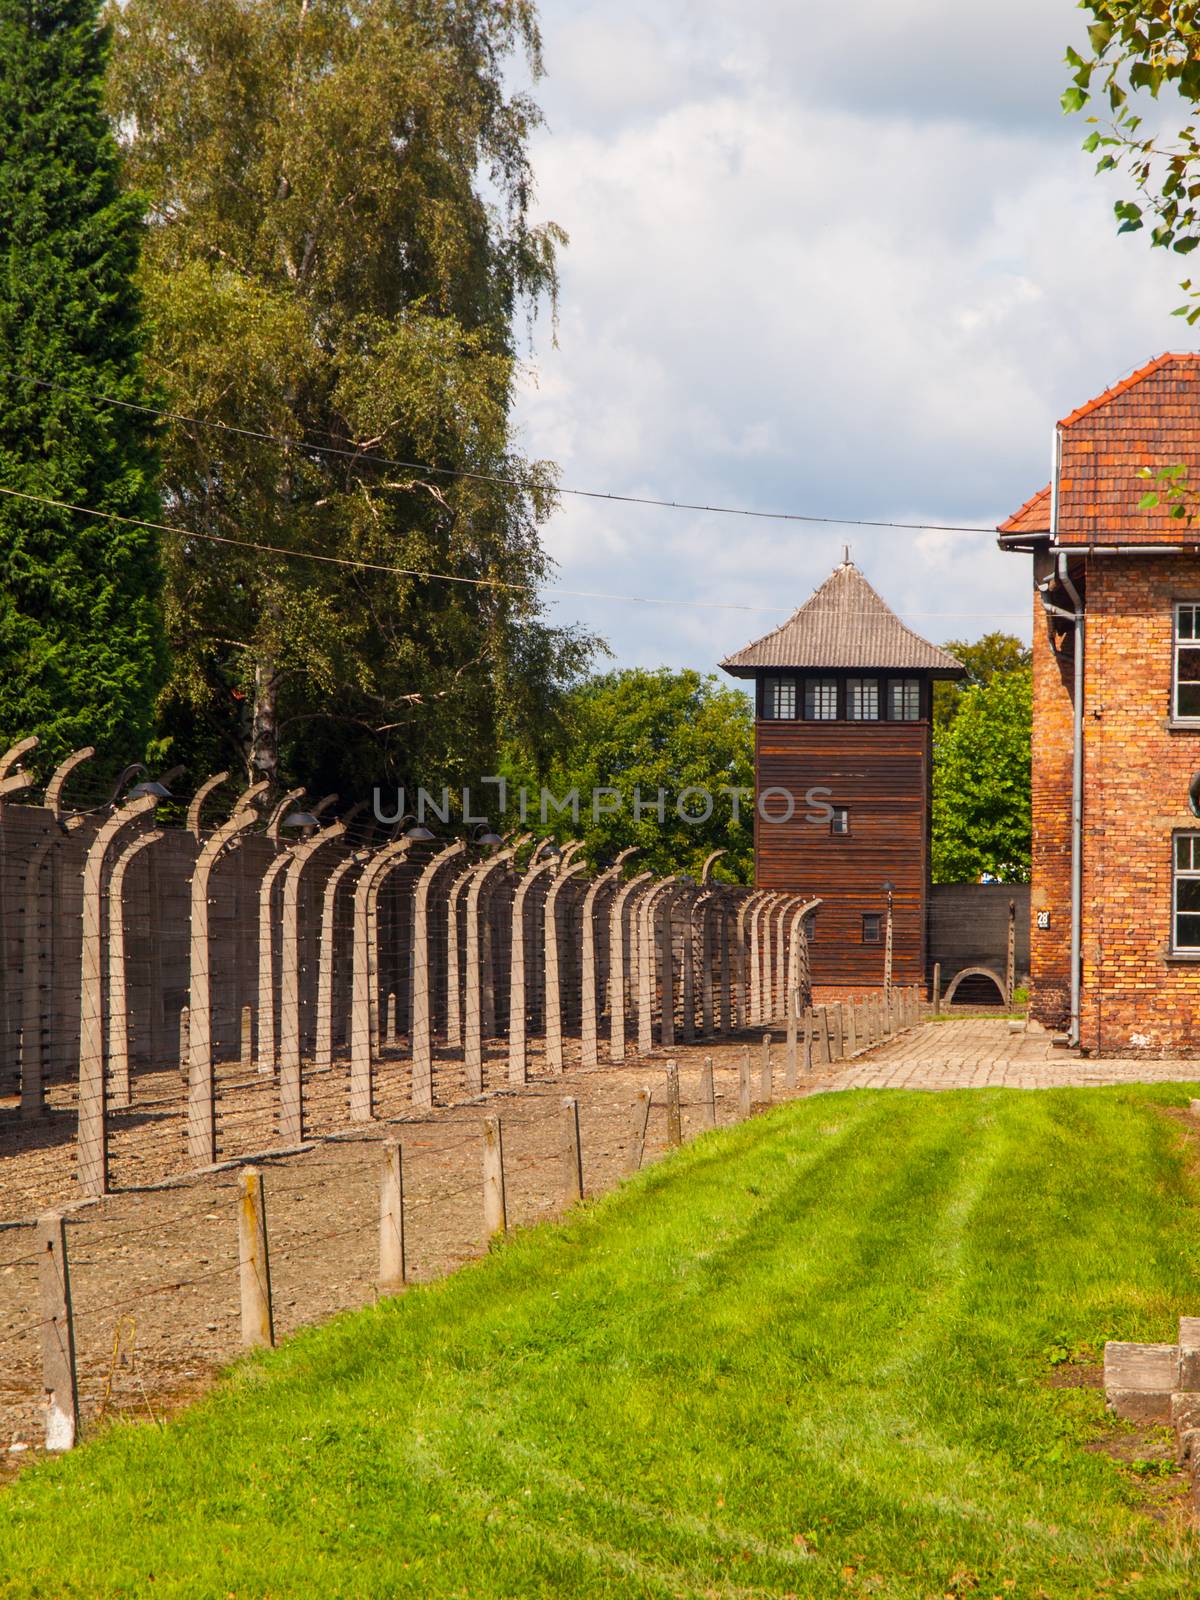 Fence and guard tower of concentration camp Auschwitz (Oswiecim)